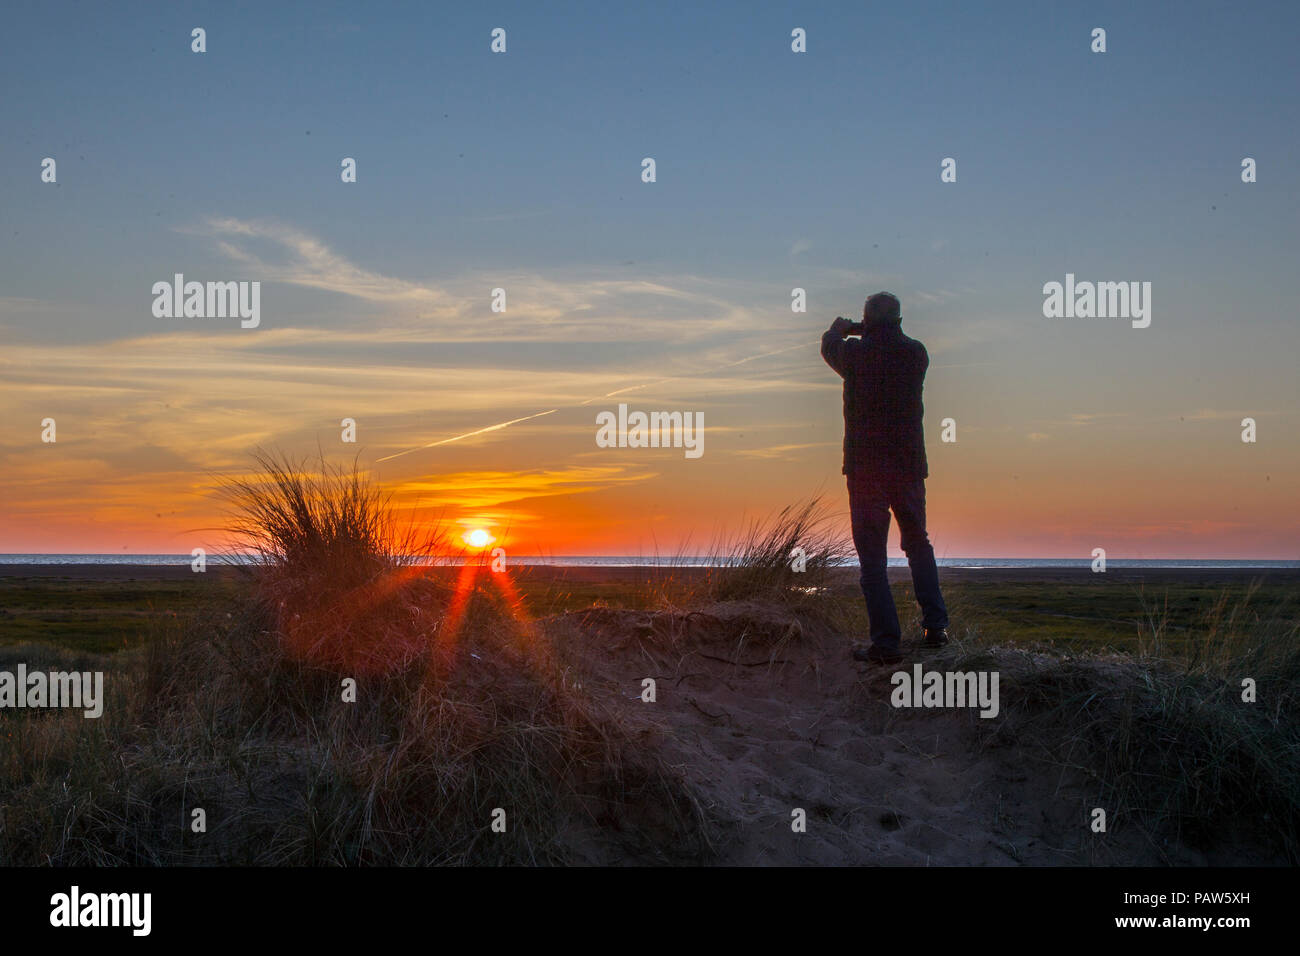 Southport, Merseyside, UK 14th July, 2018. Silhouette man. UK Weather. Colourful sunset over the Irish Sea and Ainsdale Sand Dunes National Nature Reserve (NNR), which is a 508-hectare site comprising rare dunes, beach and woodland habitats. There are 10 kms of way-marked footpaths to follow, a tranquil and wild place surrounded by one of the most urban areas in England. Credit: MediaWorldImages/Alamy Live News Stock Photo